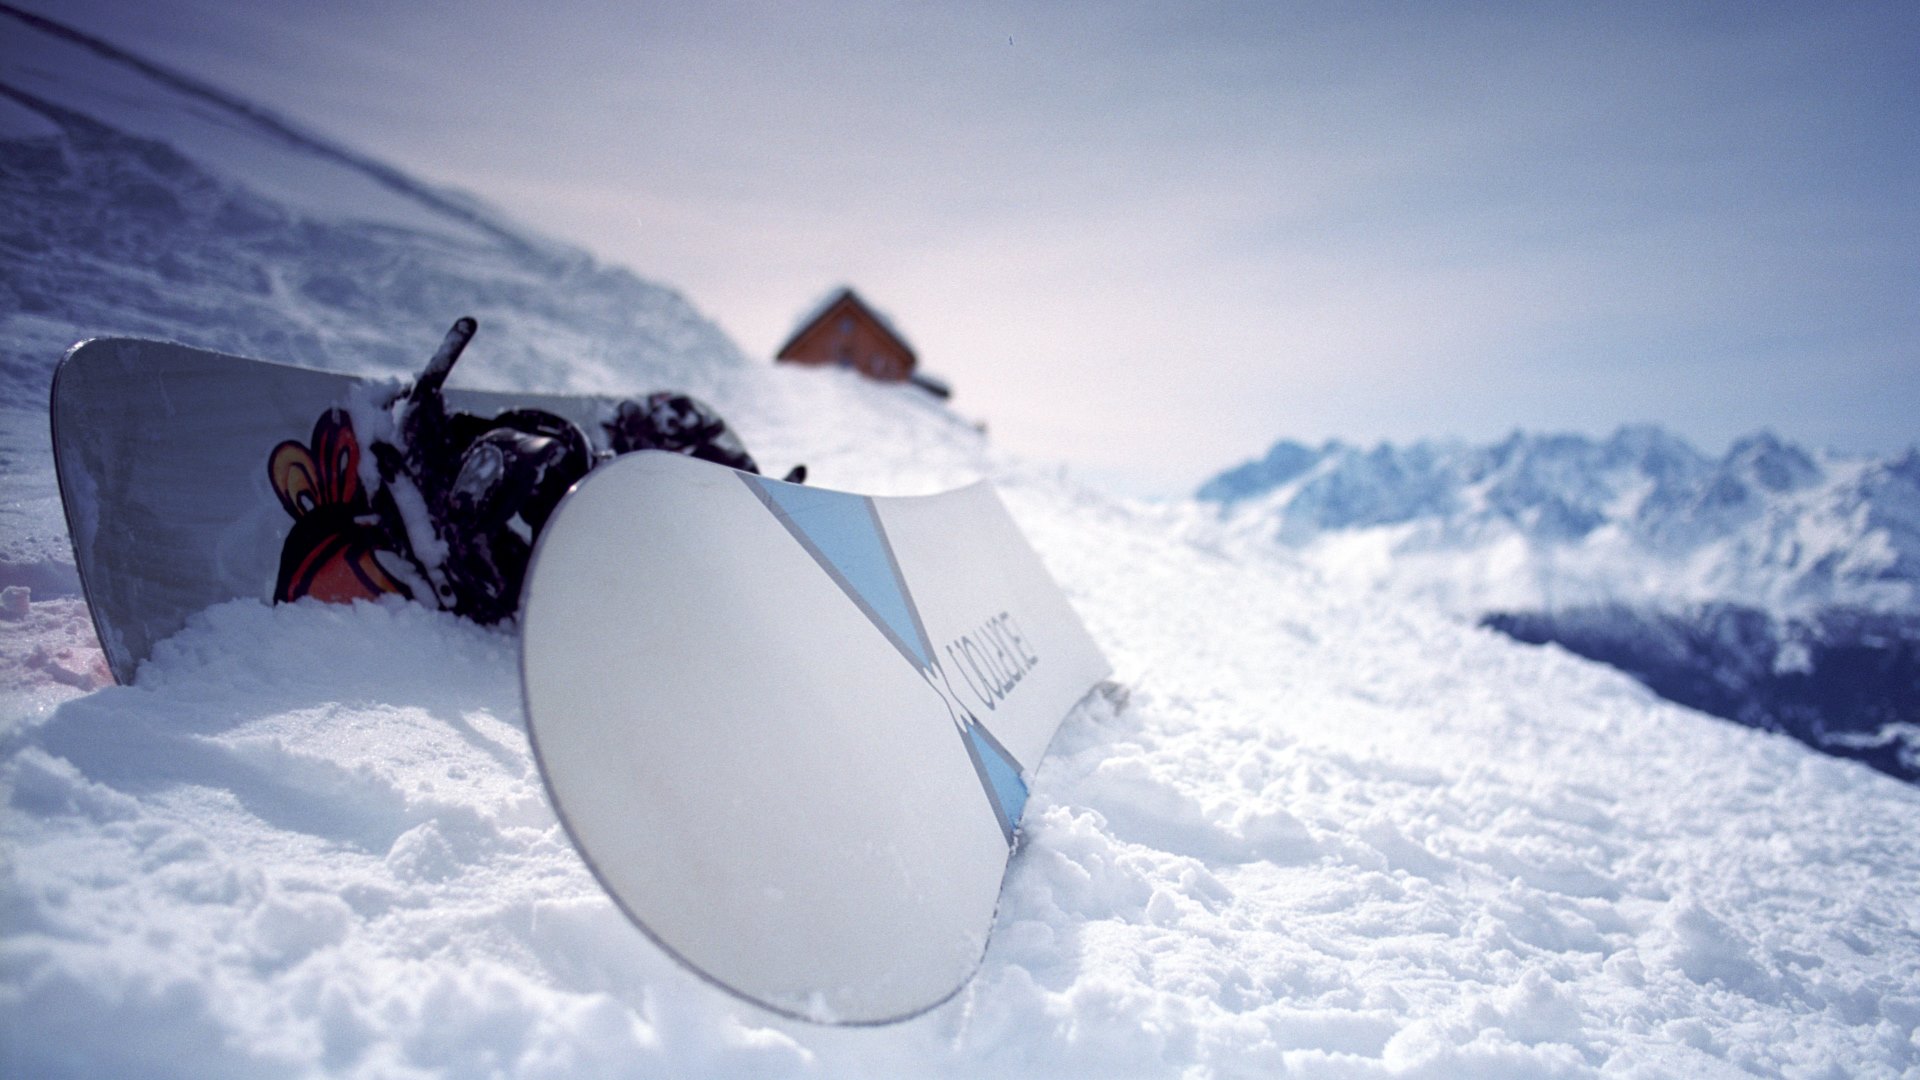 Ready for Snowboarding HD Wallpapers. 4K Wallpapers